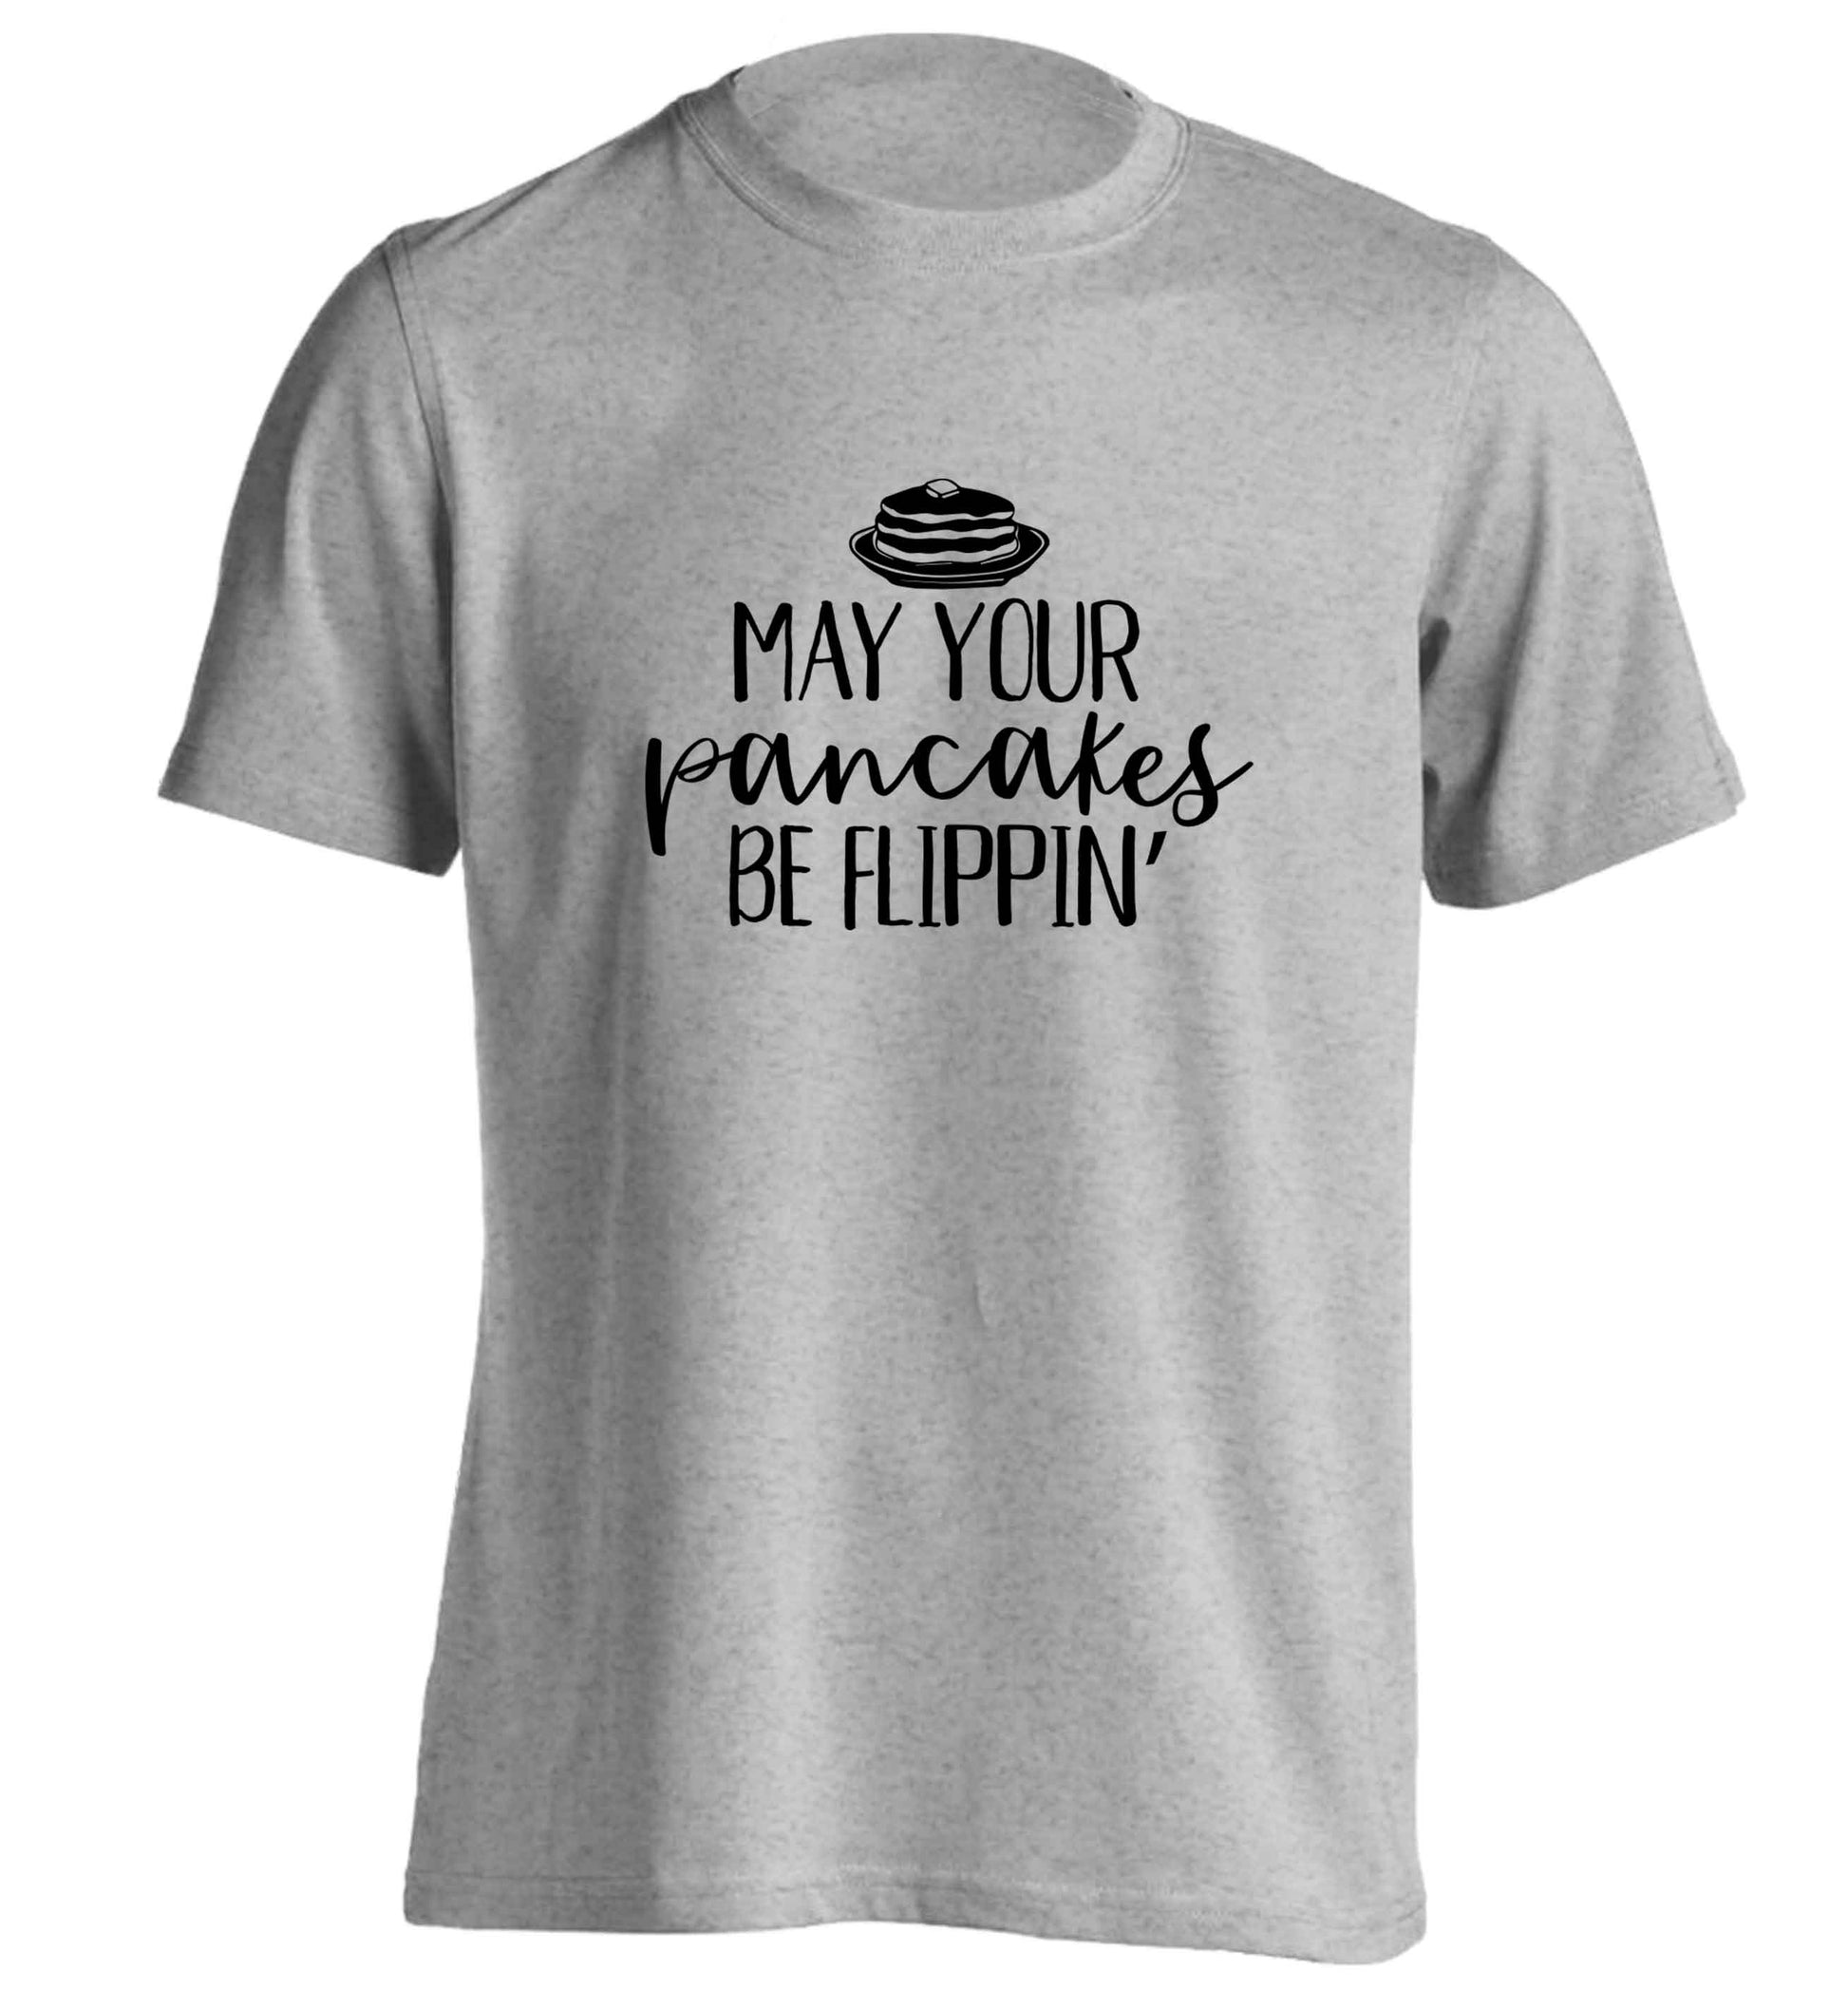 May your pancakes be flippin' adults unisex grey Tshirt 2XL